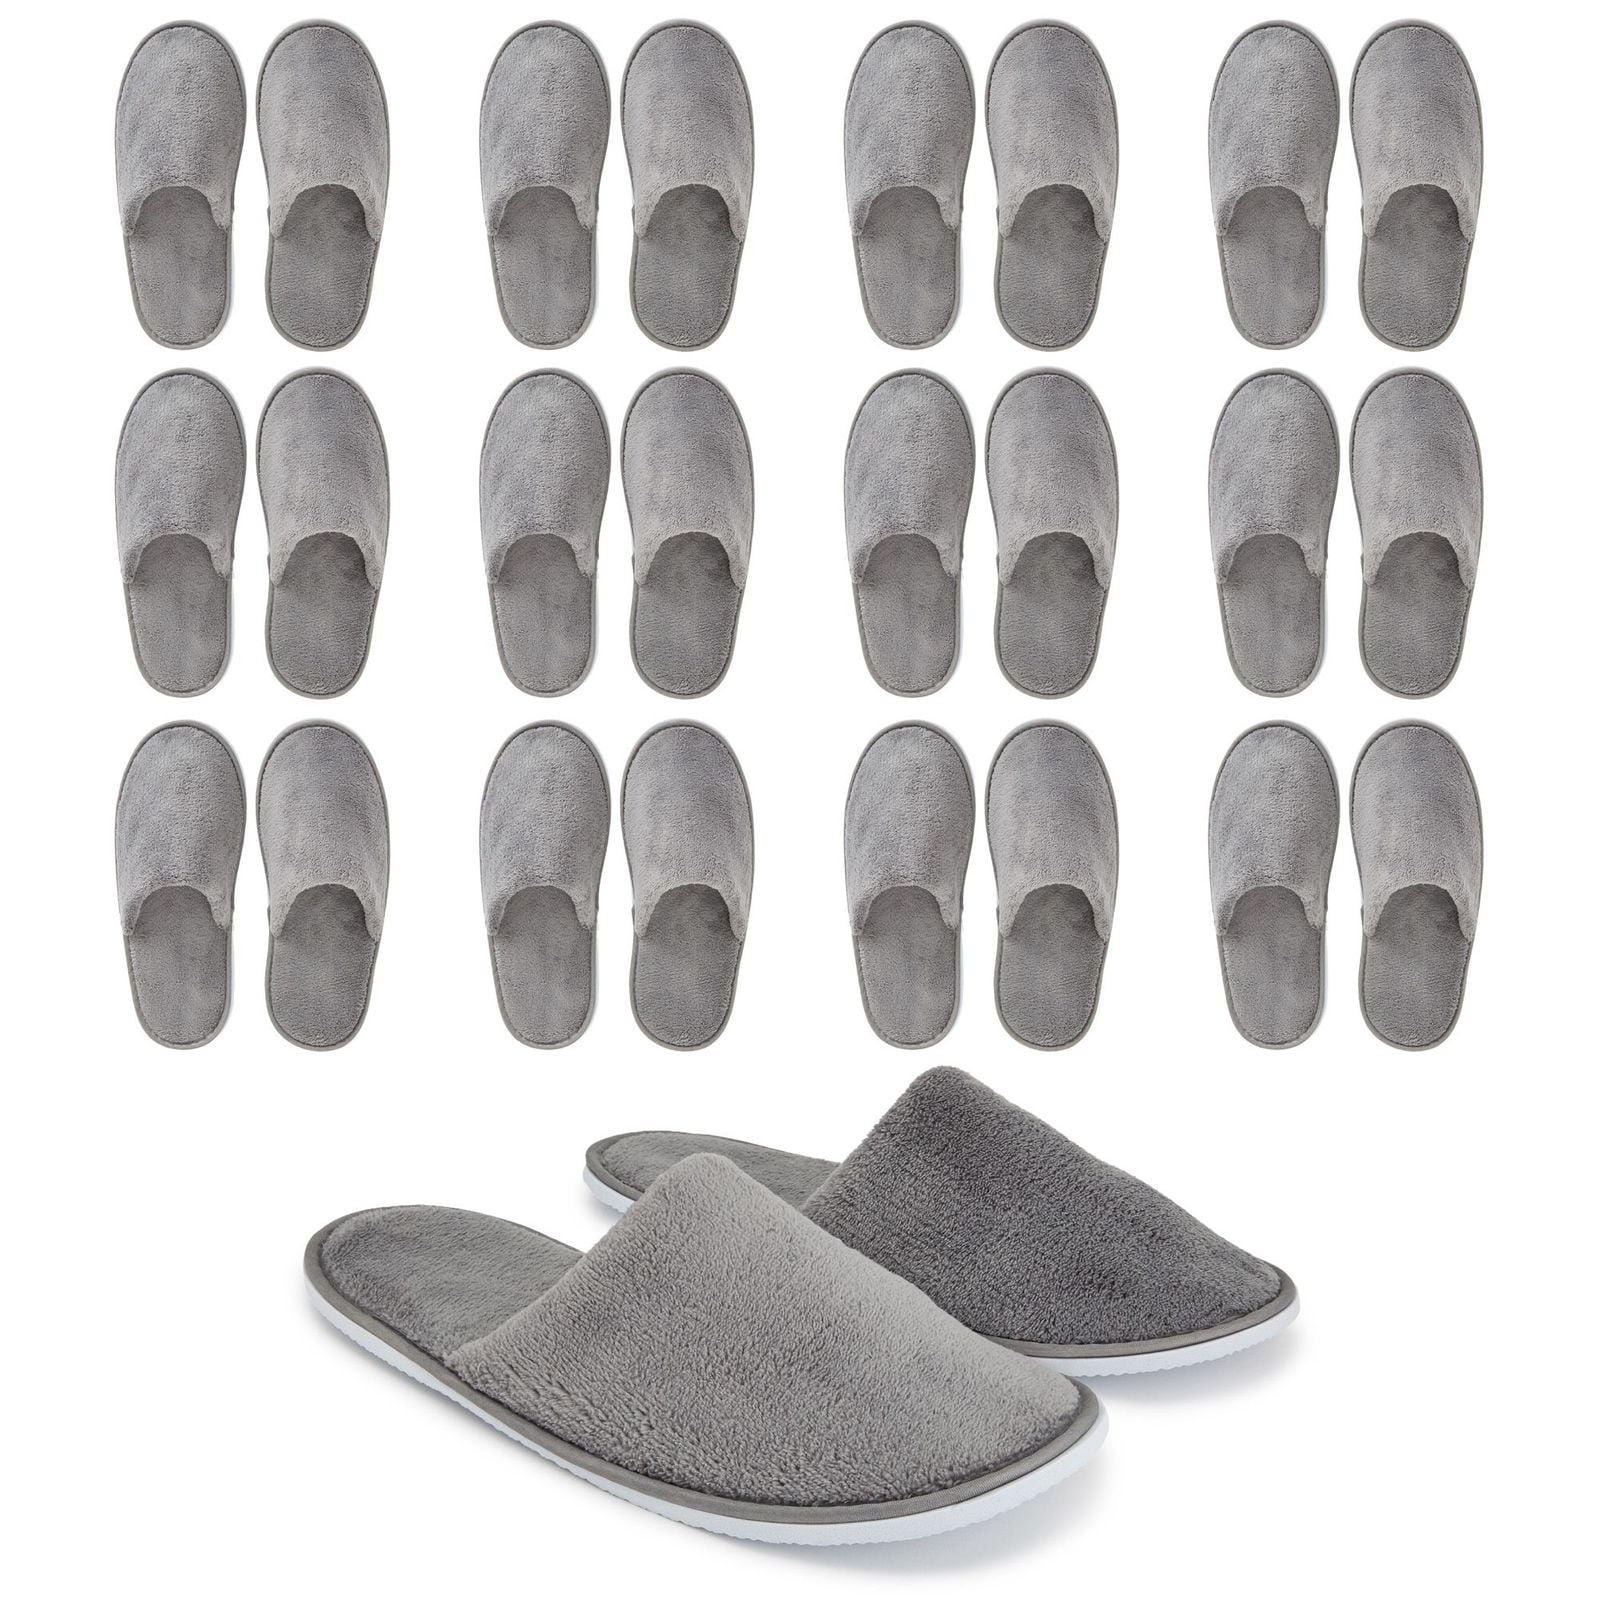 1/5/10 pairs disposable closed toe guest slippers hotel spa slipper shoes*EBLCA 